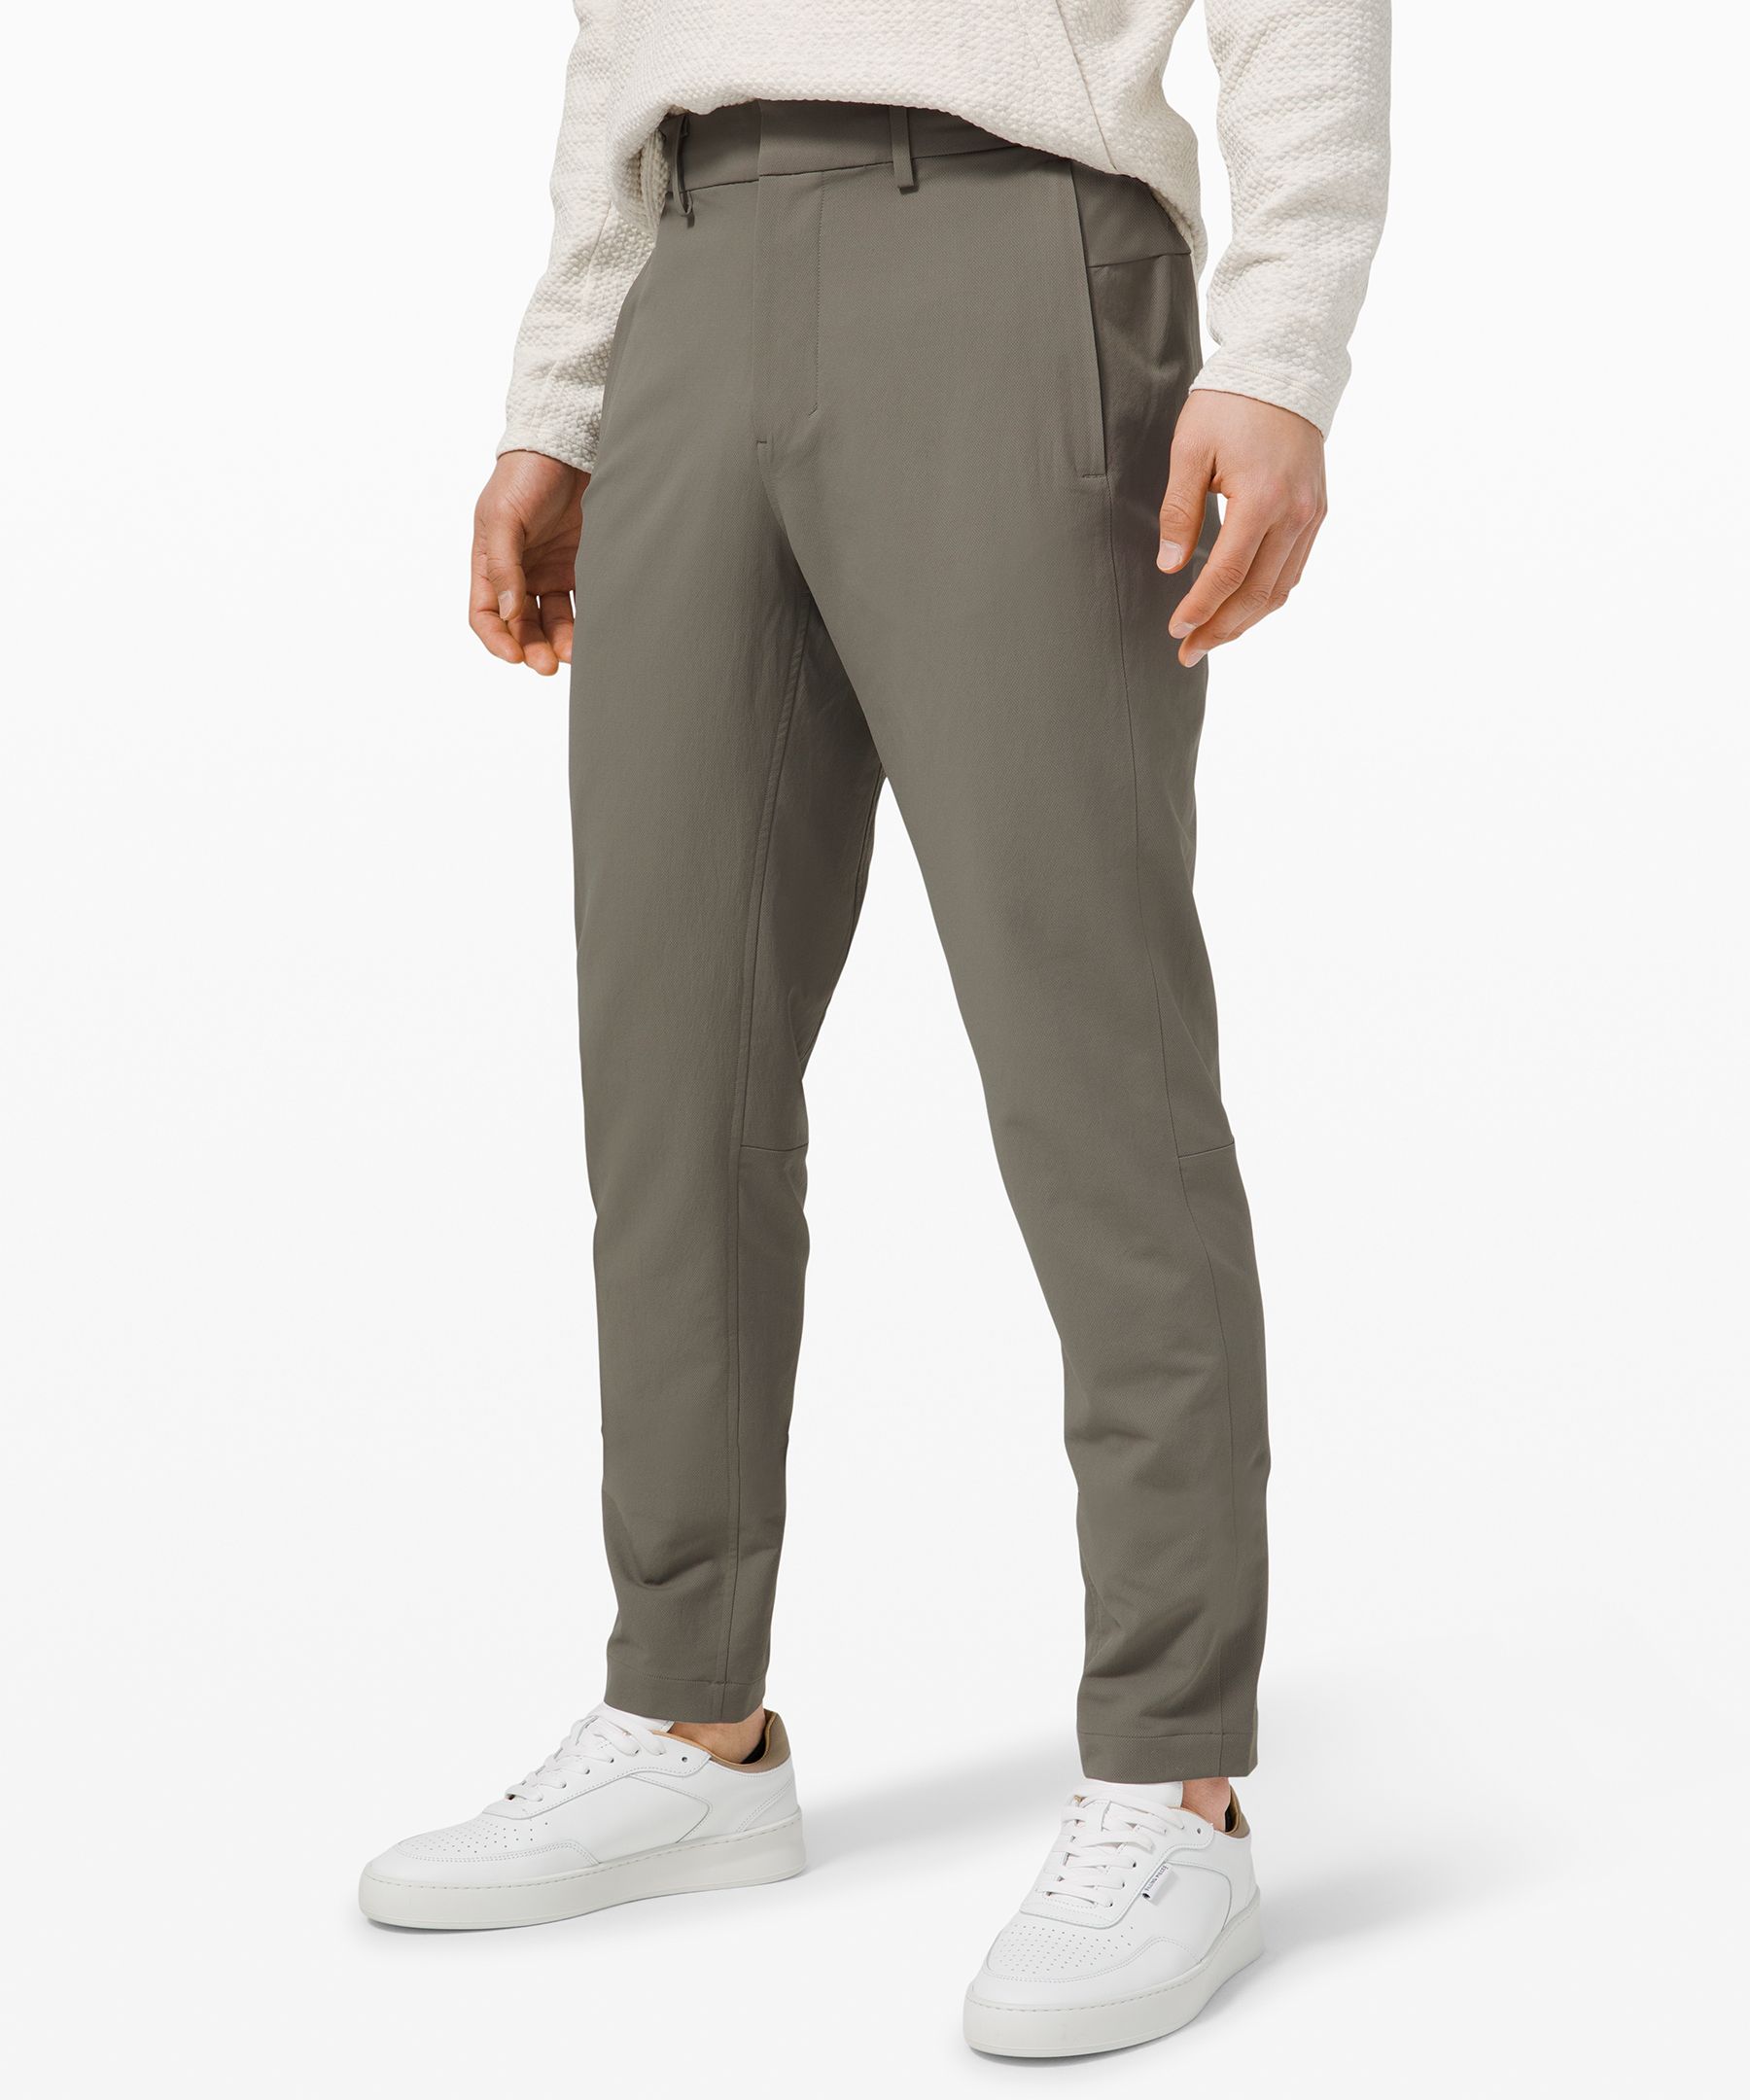 Lululemon New Venture Pant Review  International Society of Precision  Agriculture